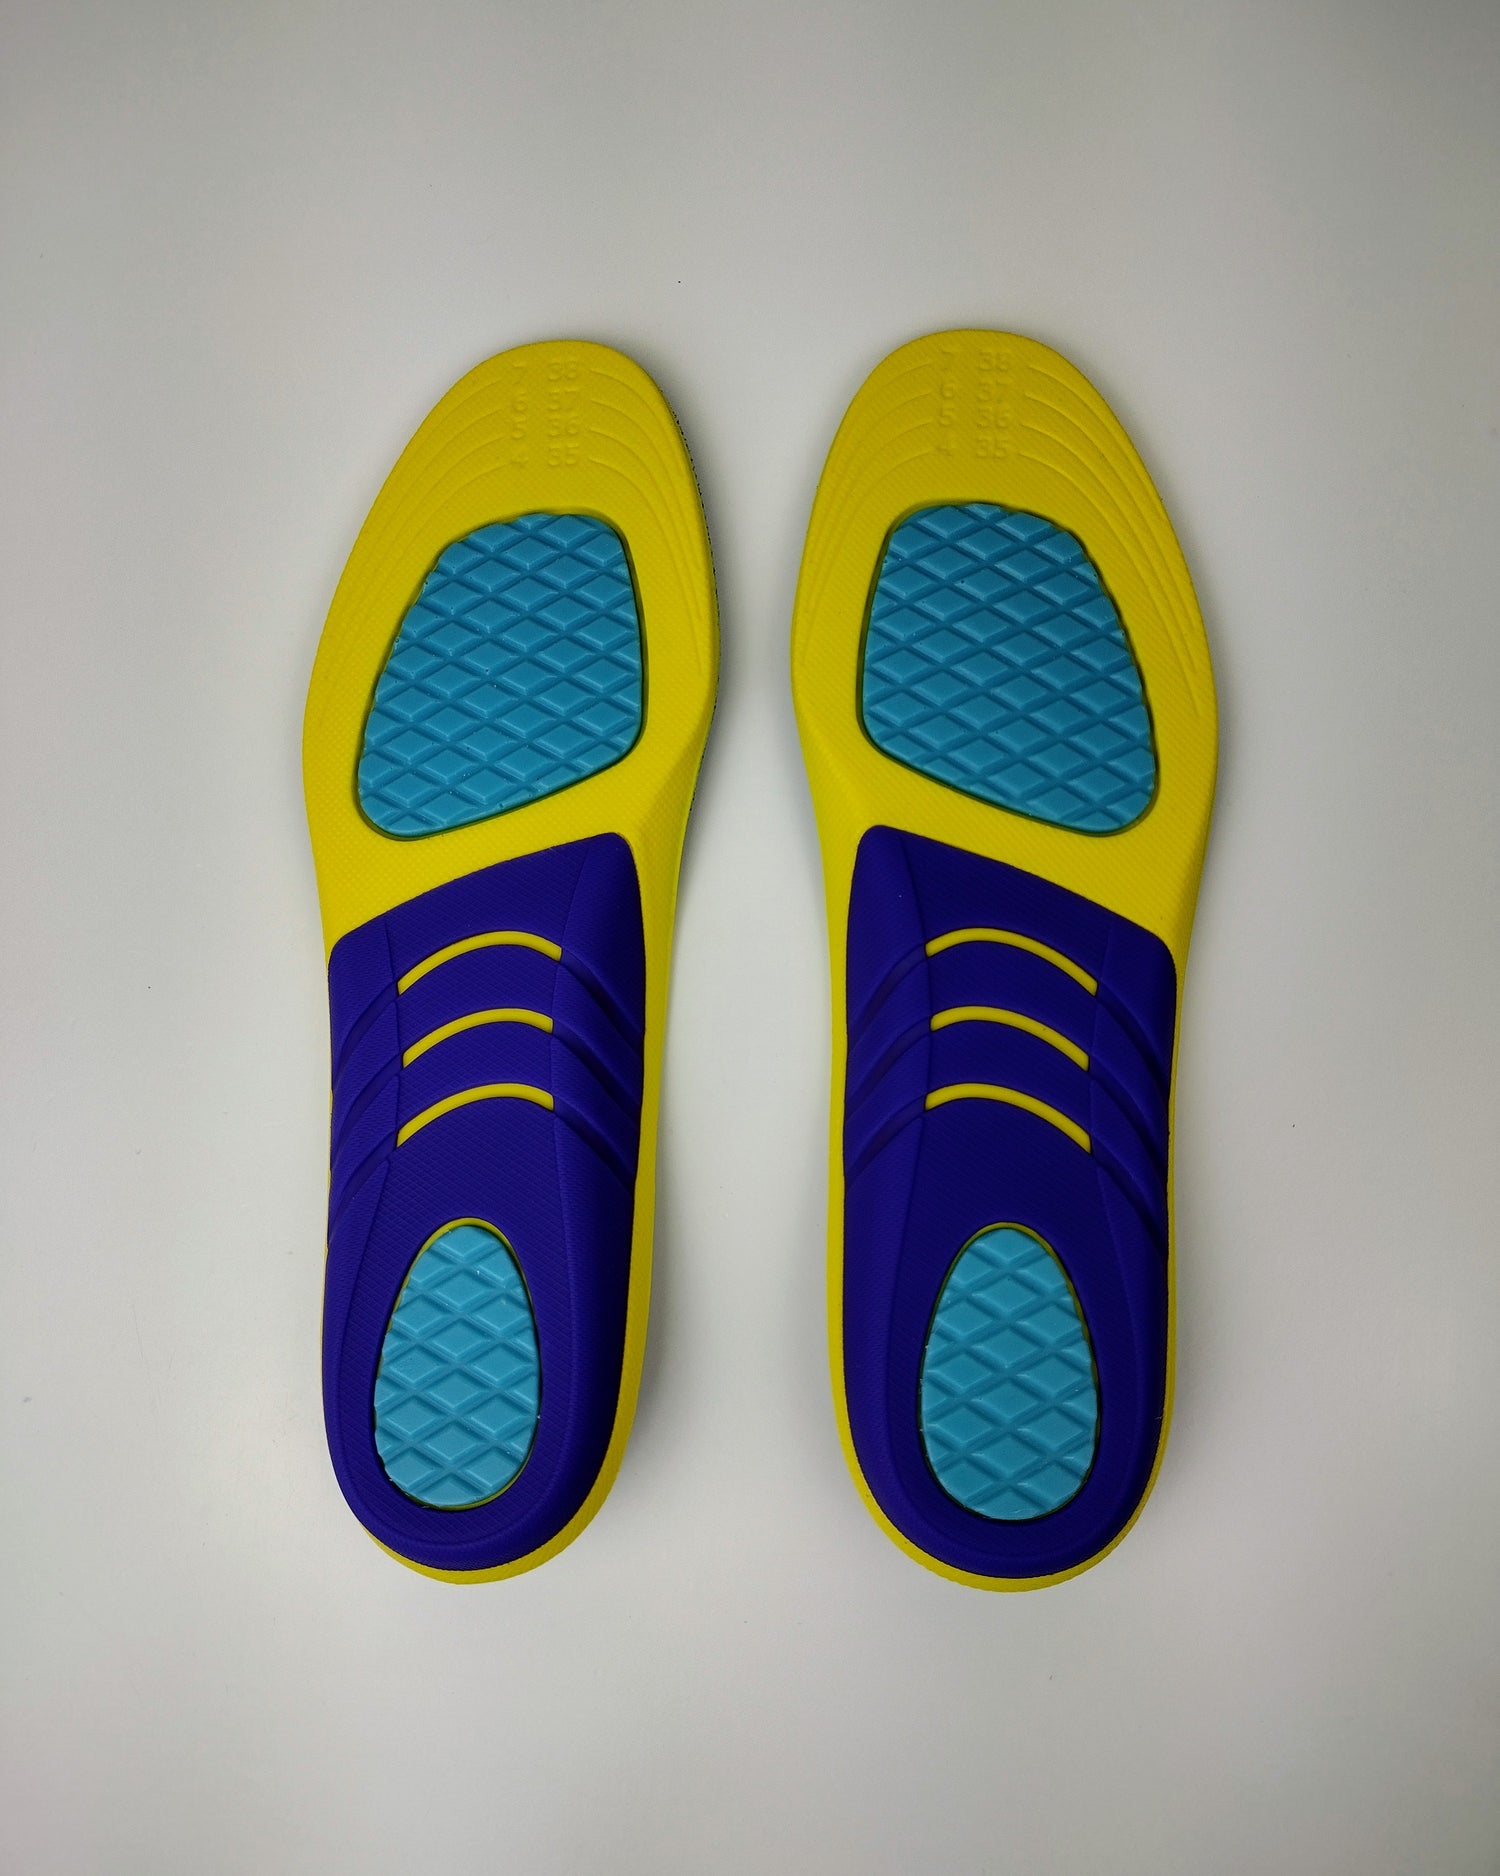 Gel Insoles for Heels | Gel Arch Support | Train Beyond the Pain